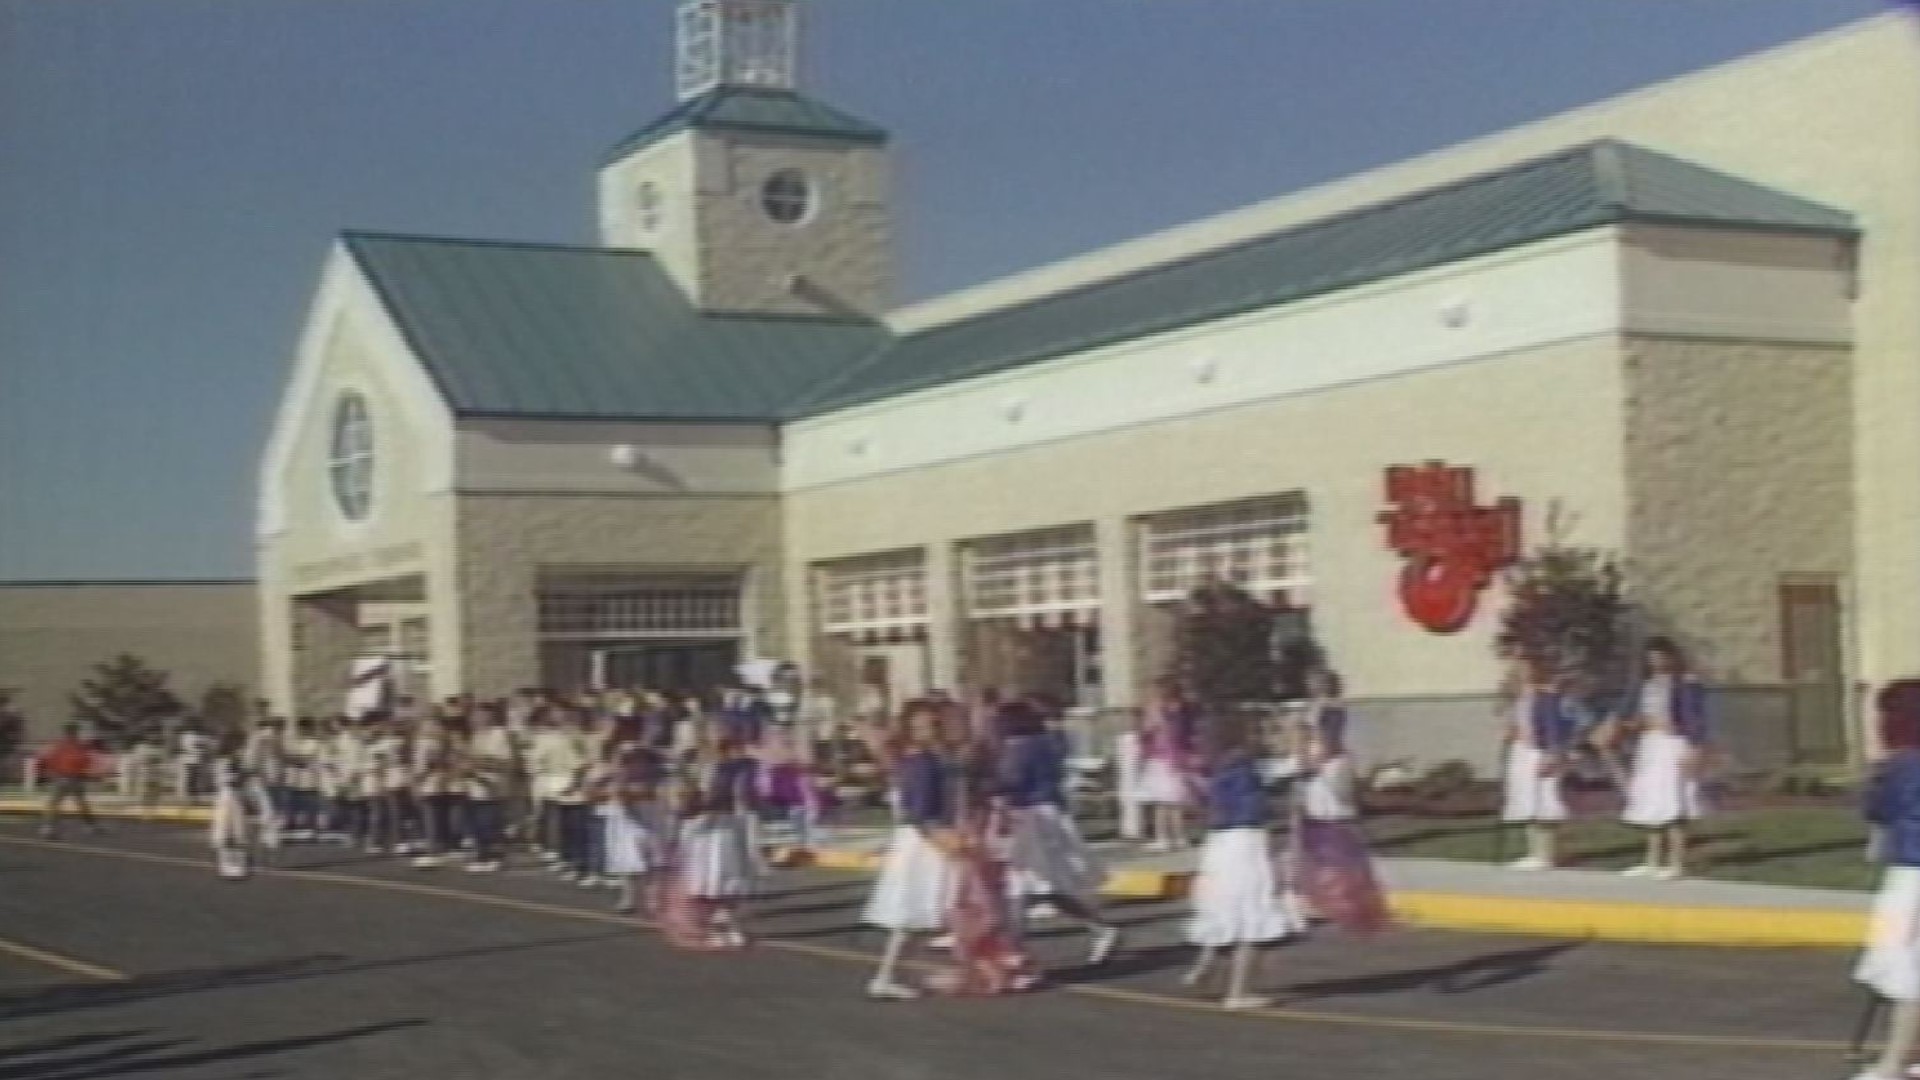 10/11/1989: Chesapeake Square Mall opens its doors in Western Branch, with much fanfare and hopes of prosperity. Thirty years later, the mall now struggles to keep businesses. Its current owners hope some radical redevelopment can help revitalize the shopping district.